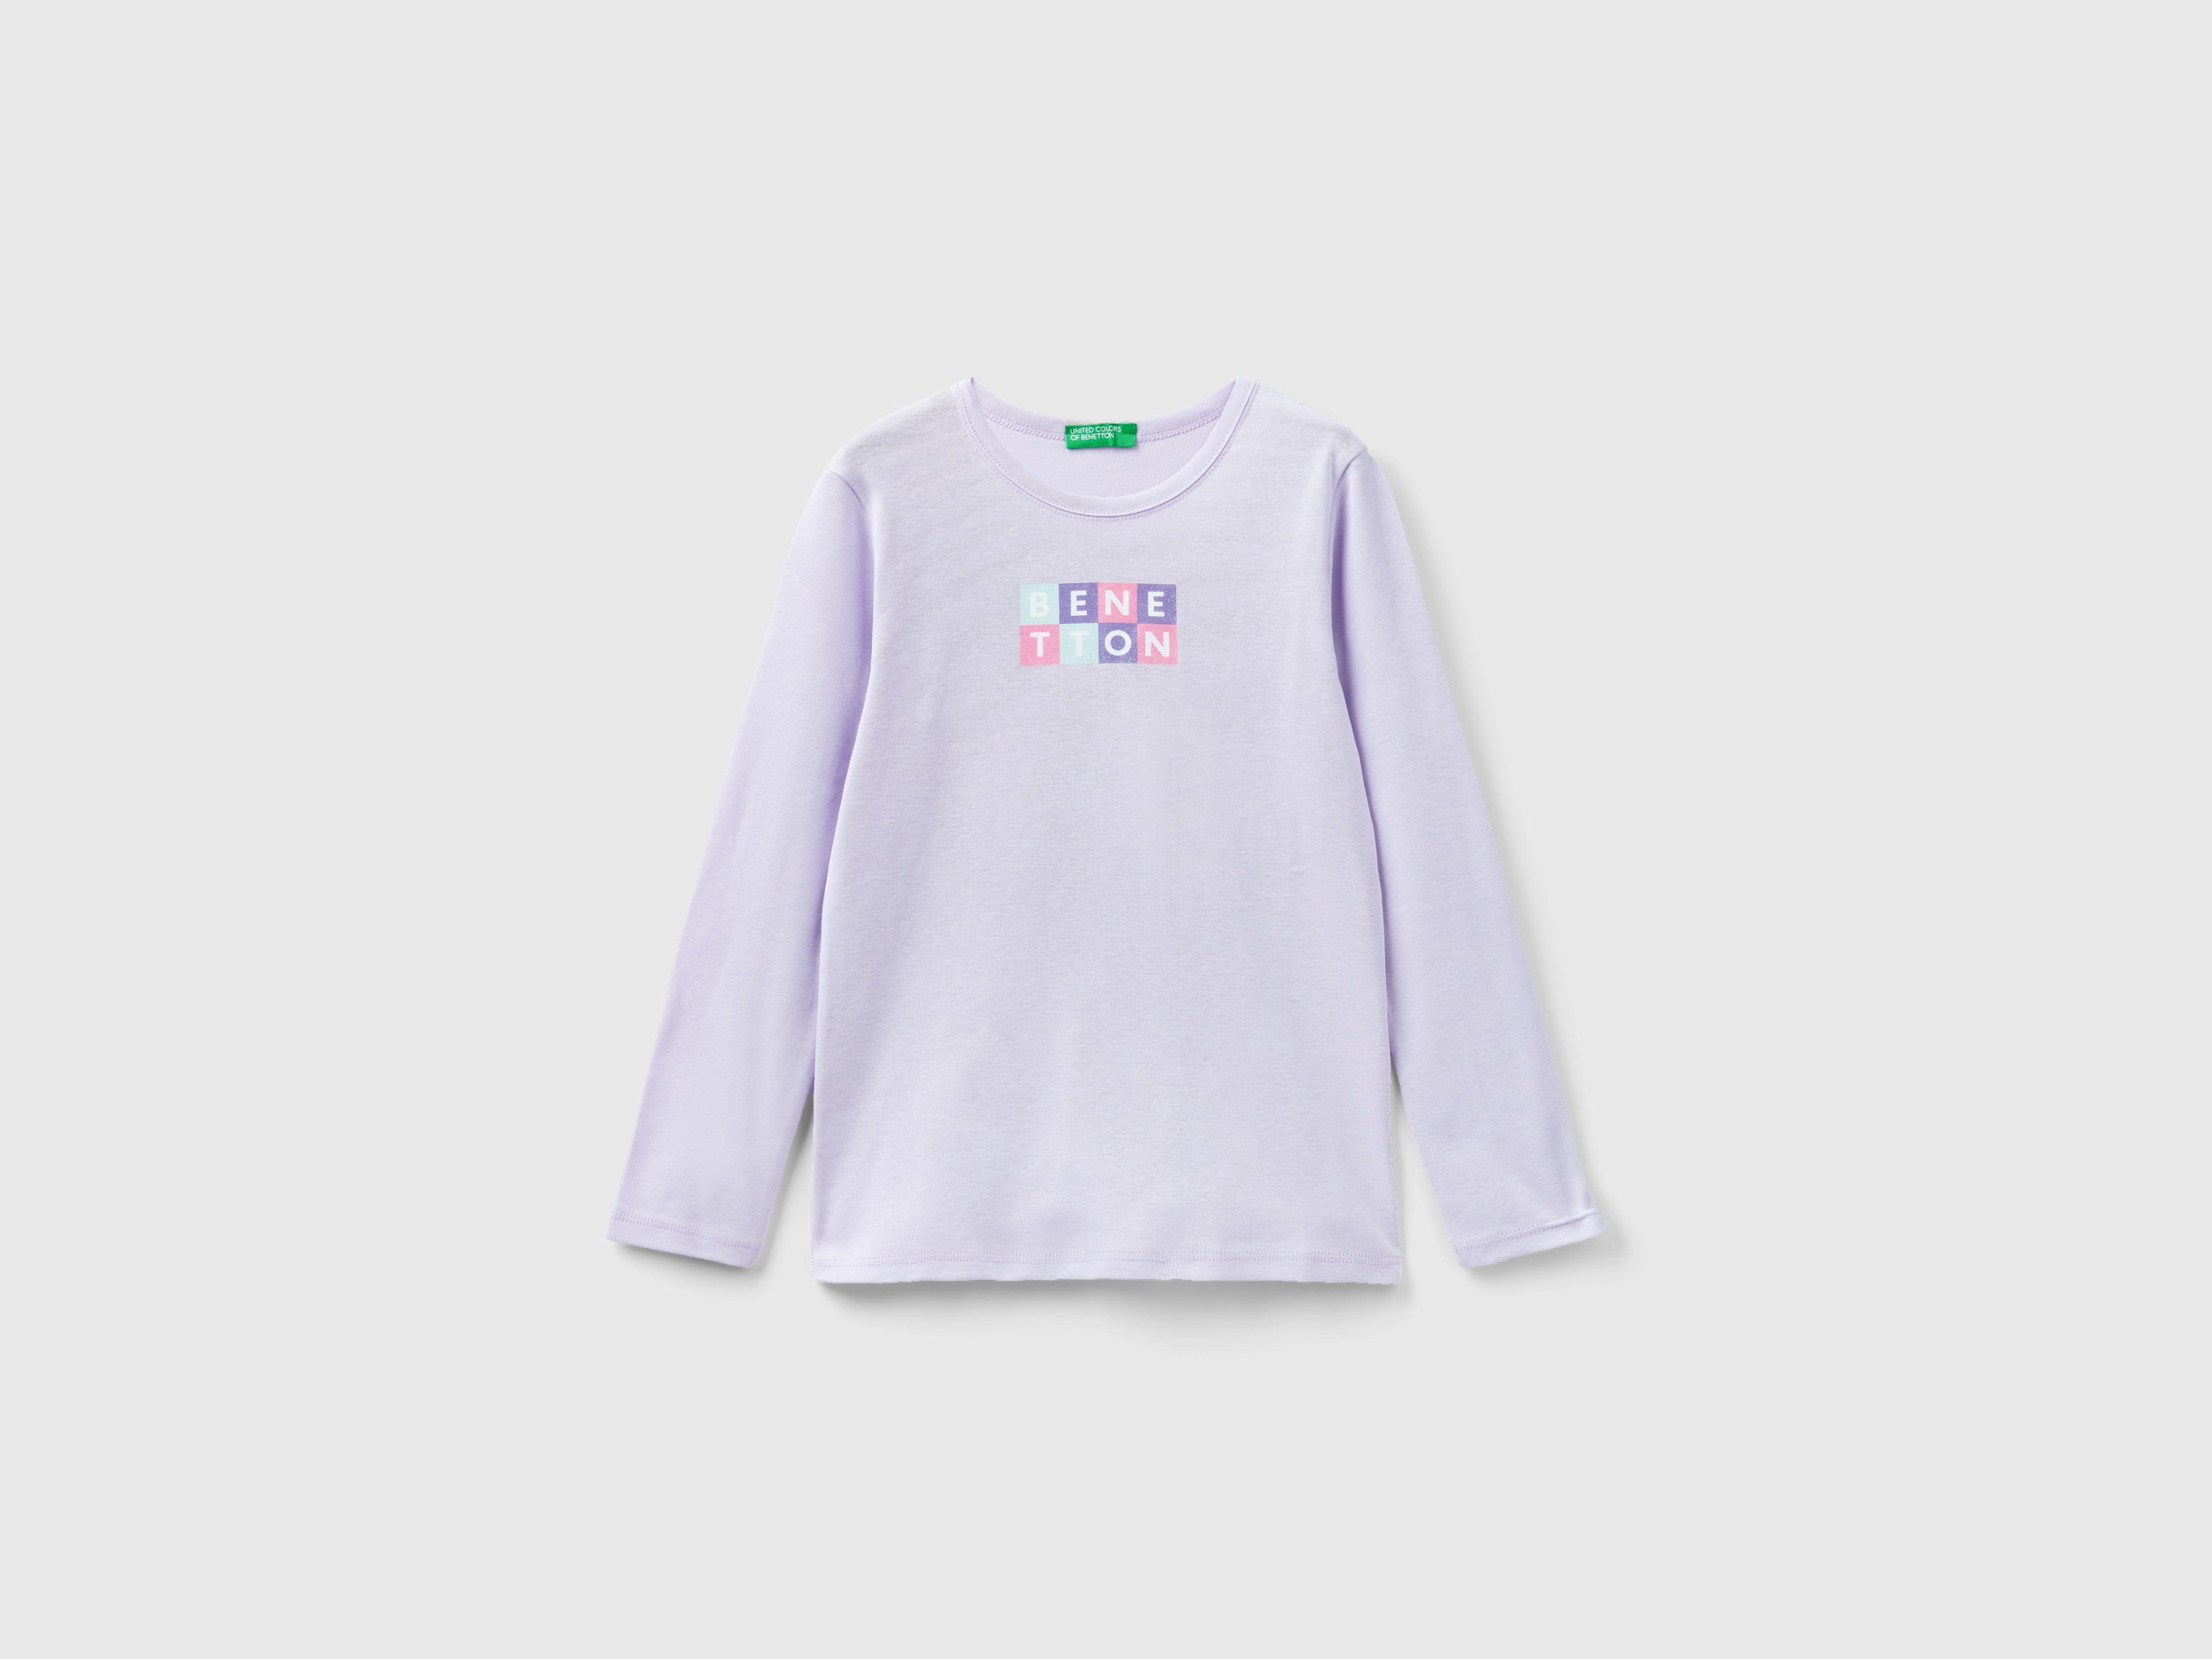 Image of Benetton, Long Sleeve T-shirt With Glitter Print, size M, Lilac, Kids